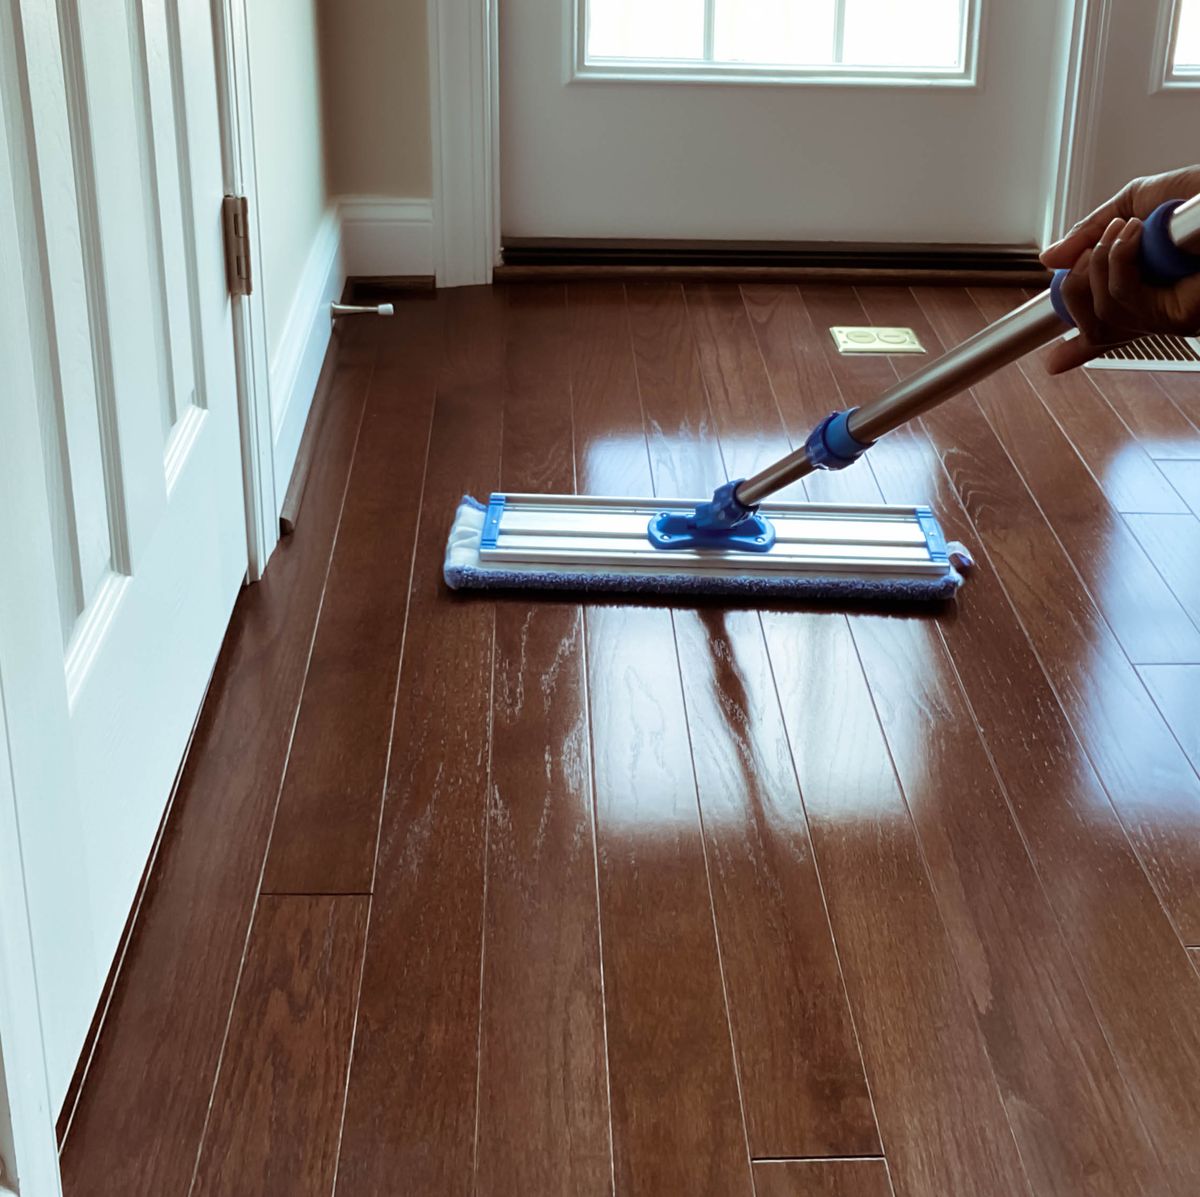 How to Effortlessly Clean Hardwood Floors Like a Pro